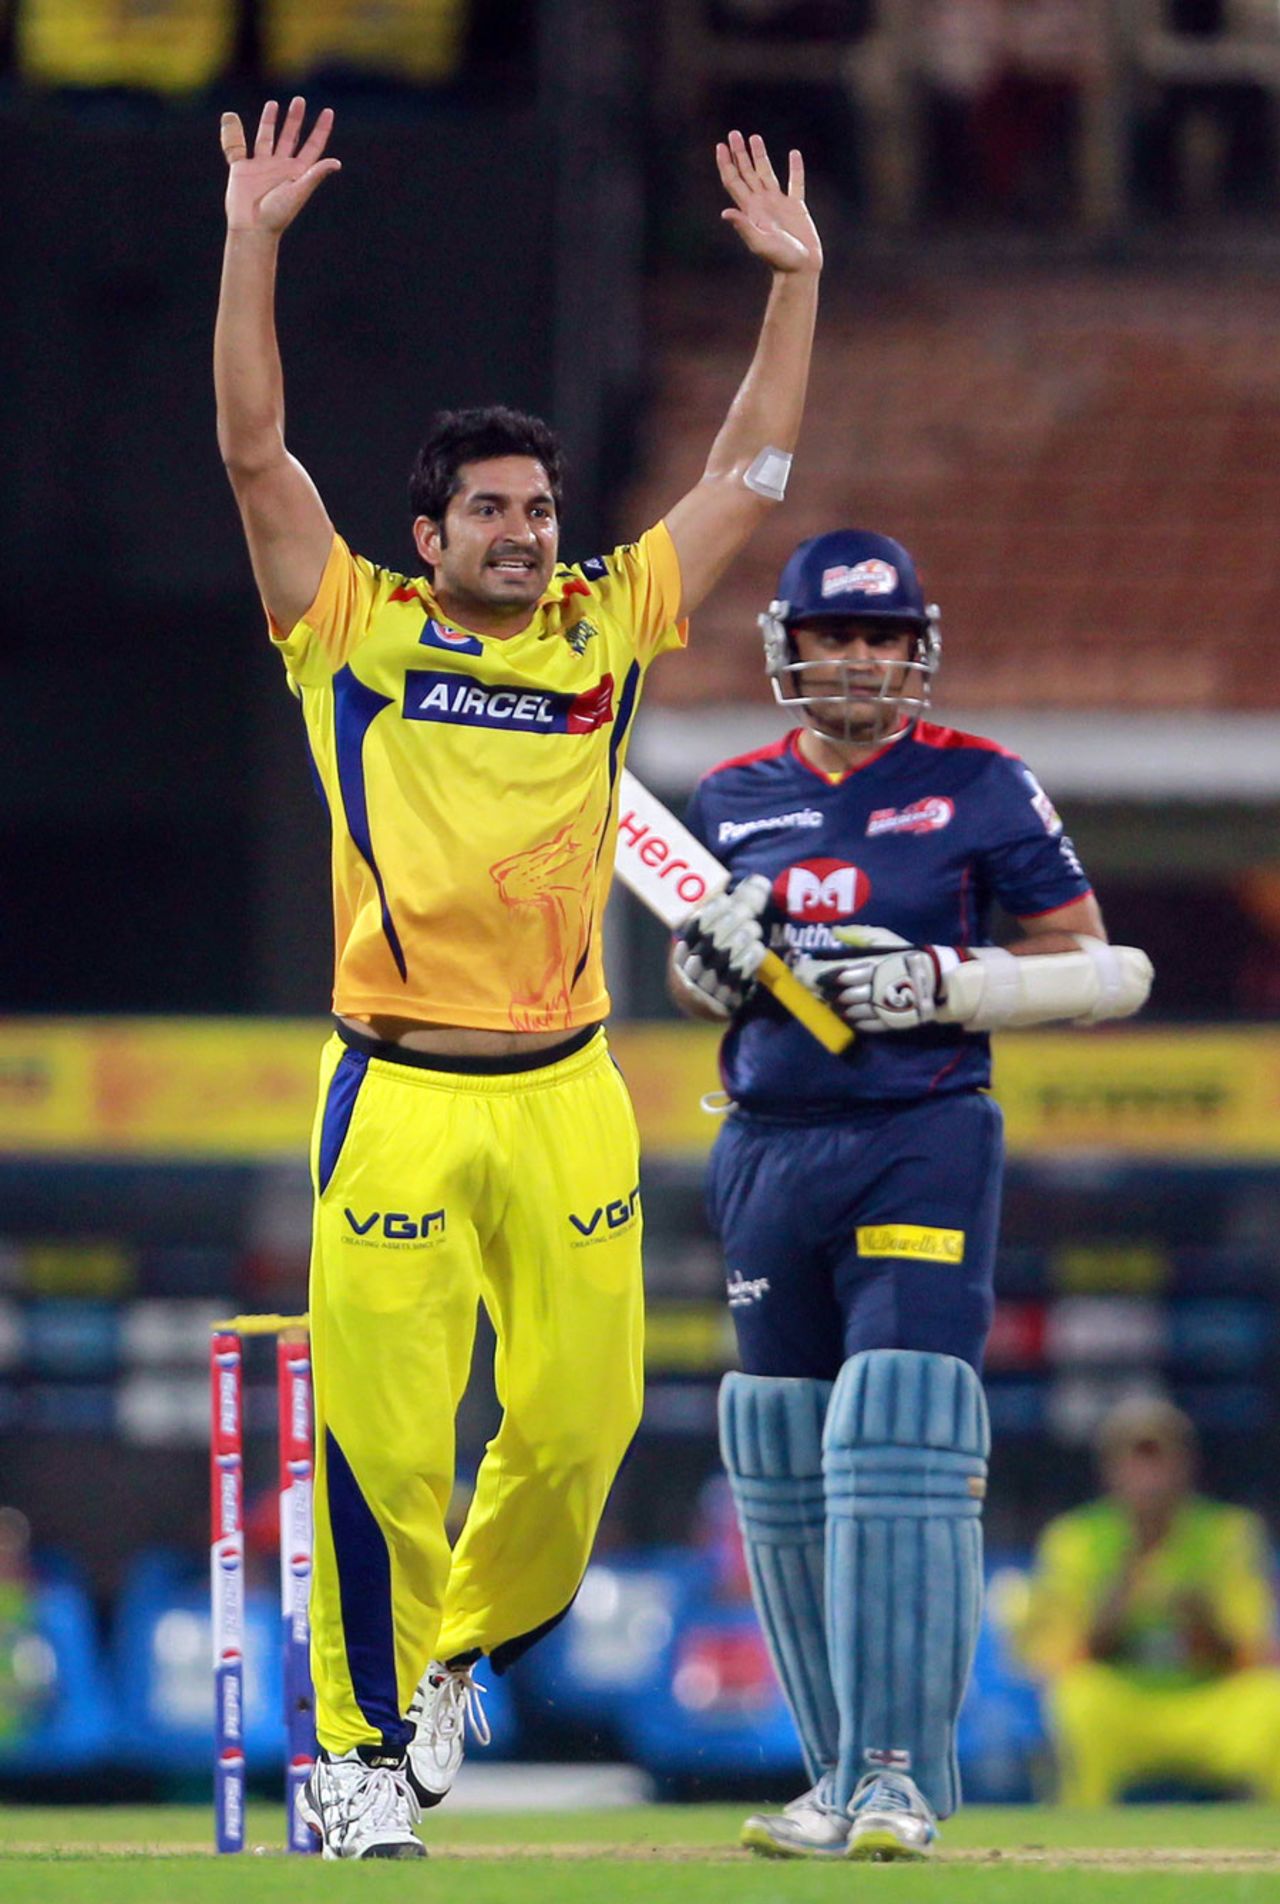 Mohit Sharma had Virender Sehwag caught behind off the second ball of the innings, Chennai Super Kings v Delhi Daredevils, IPL 2013, Chennai, May 14, 2013